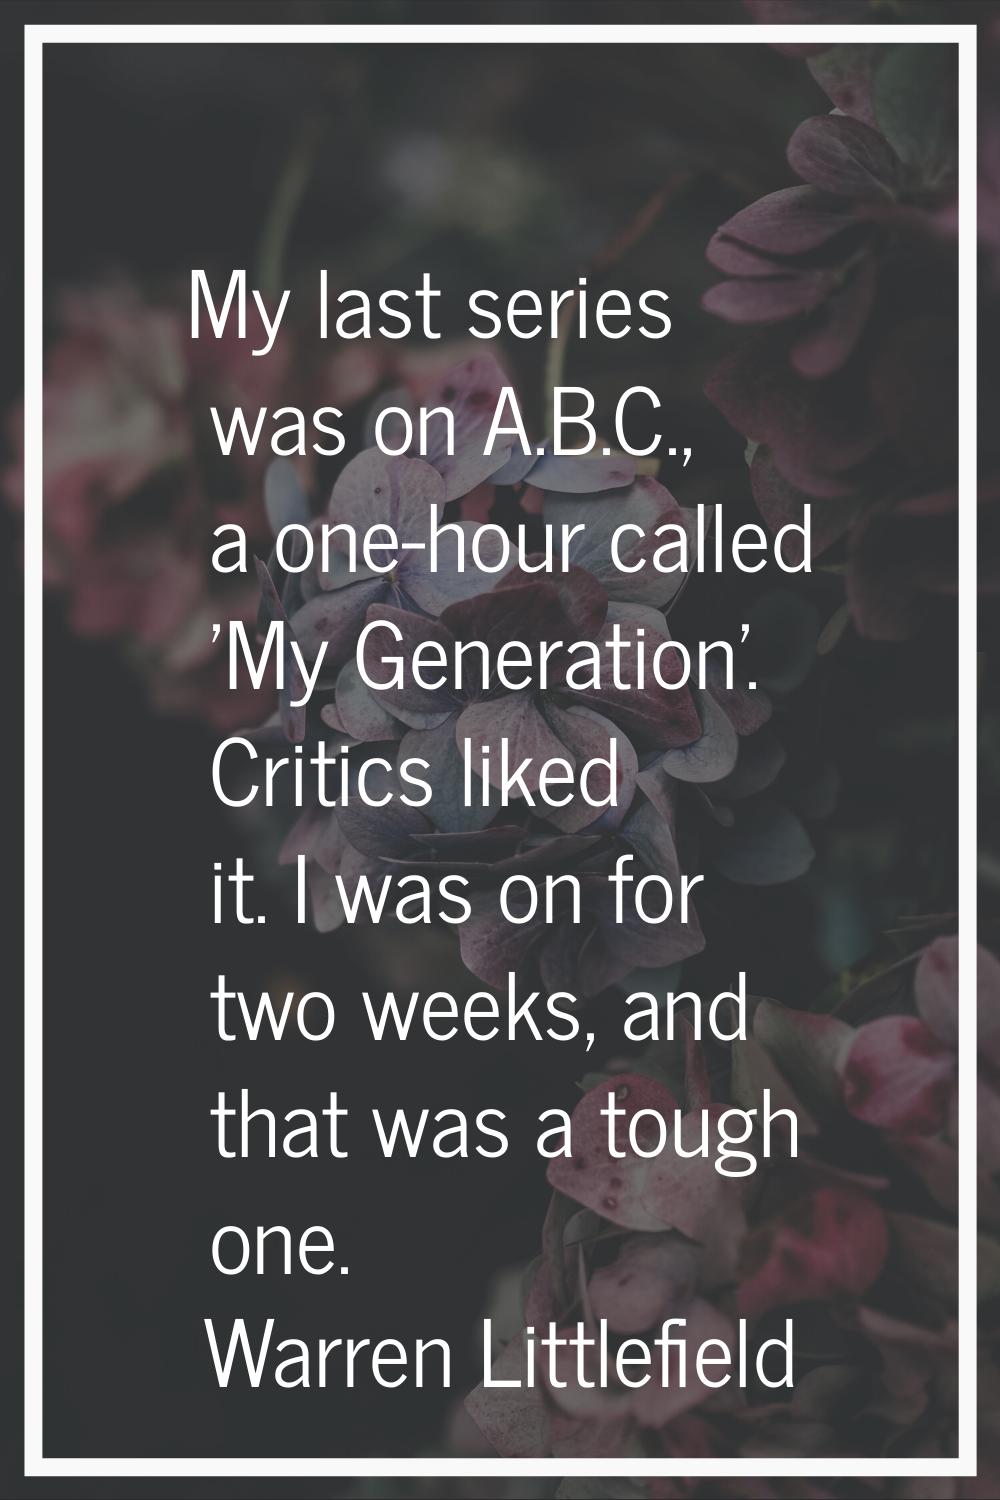 My last series was on A.B.C., a one-hour called 'My Generation'. Critics liked it. I was on for two